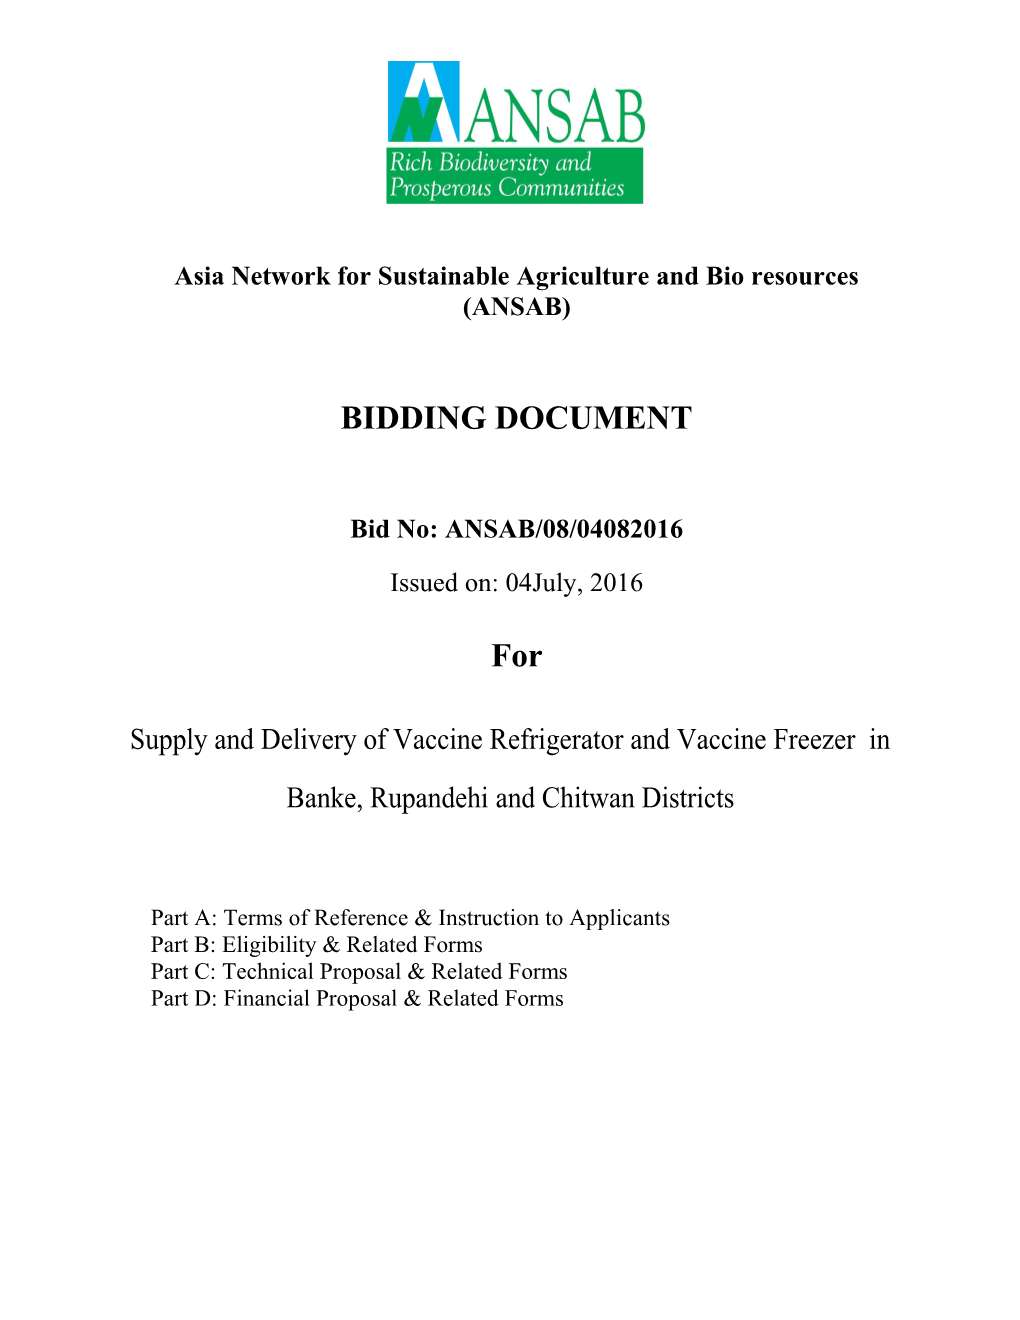 Asia Network for Sustainable Agriculture and Bio Resources (ANSAB)